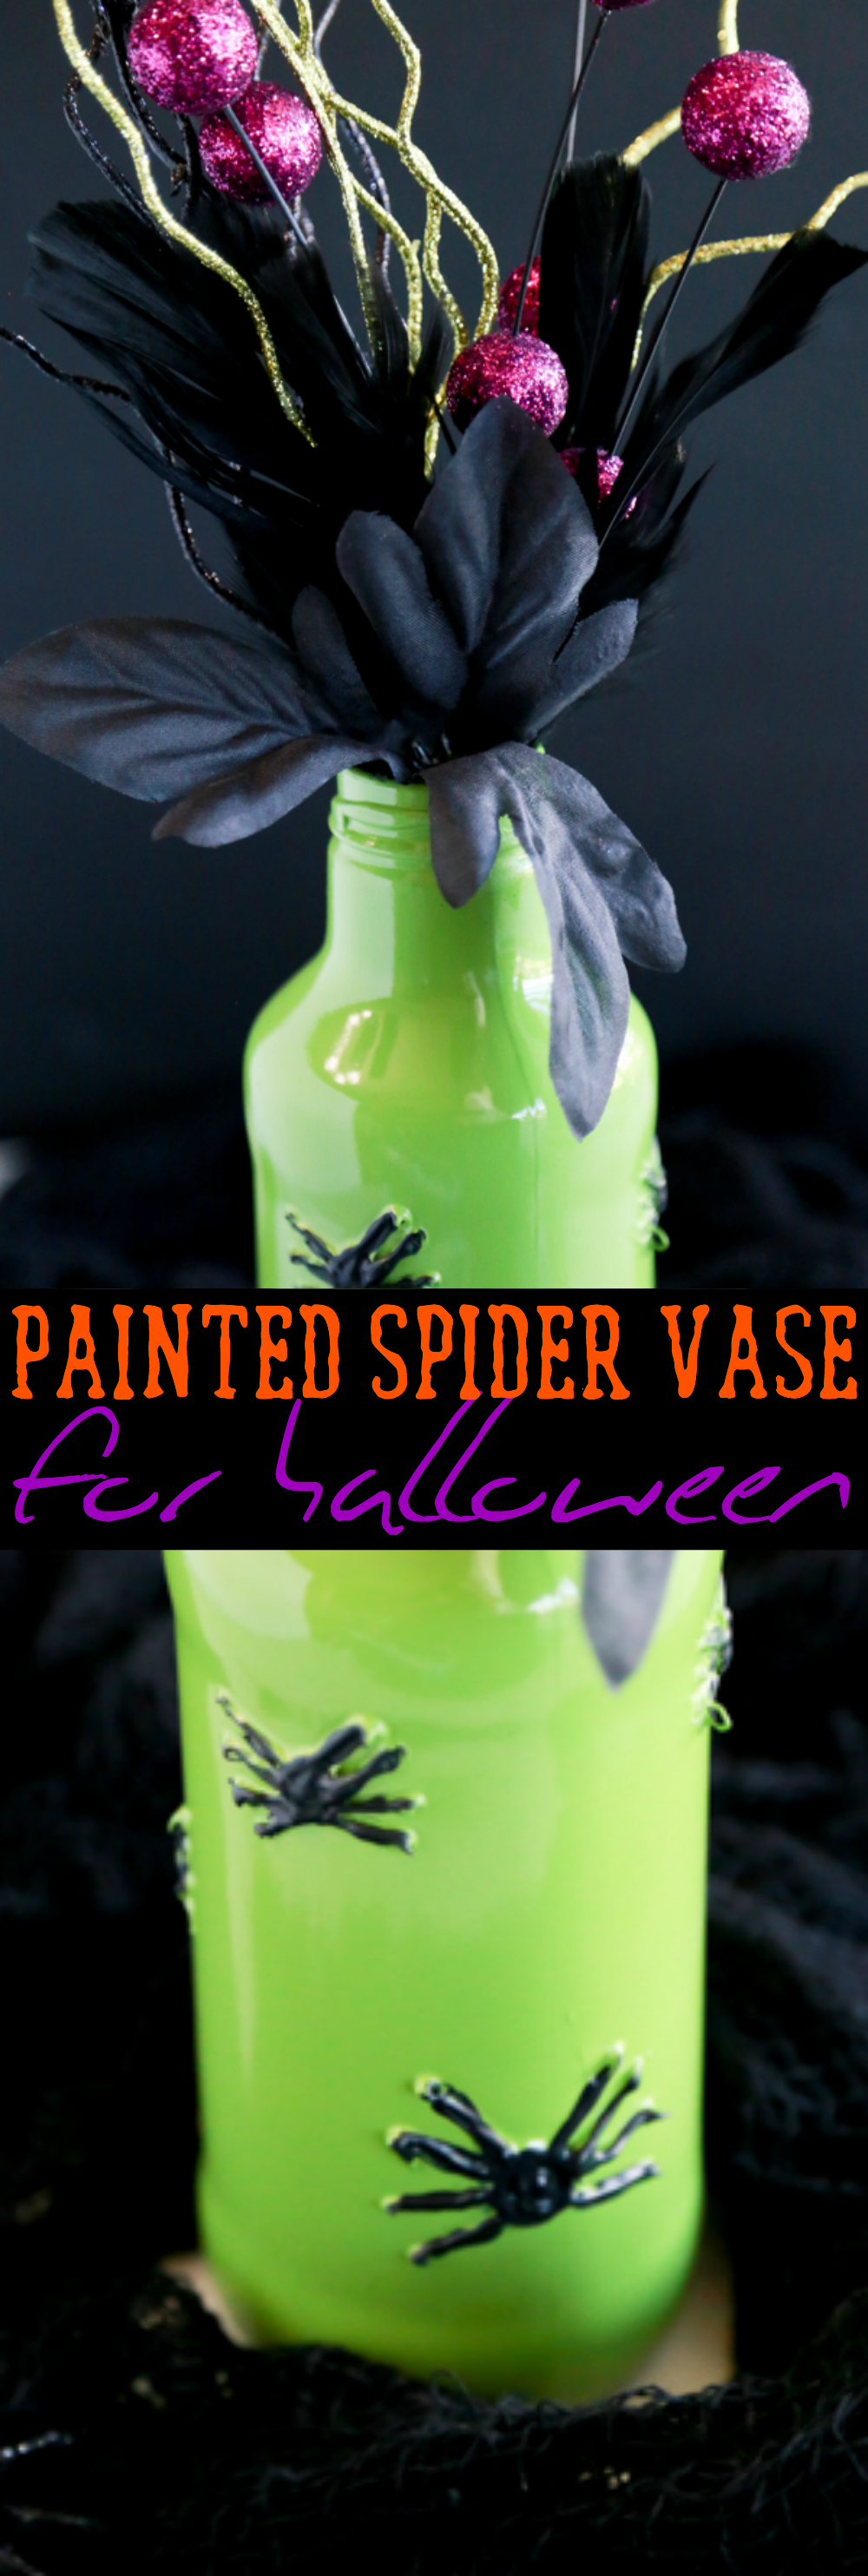 painted spider vase for halloween